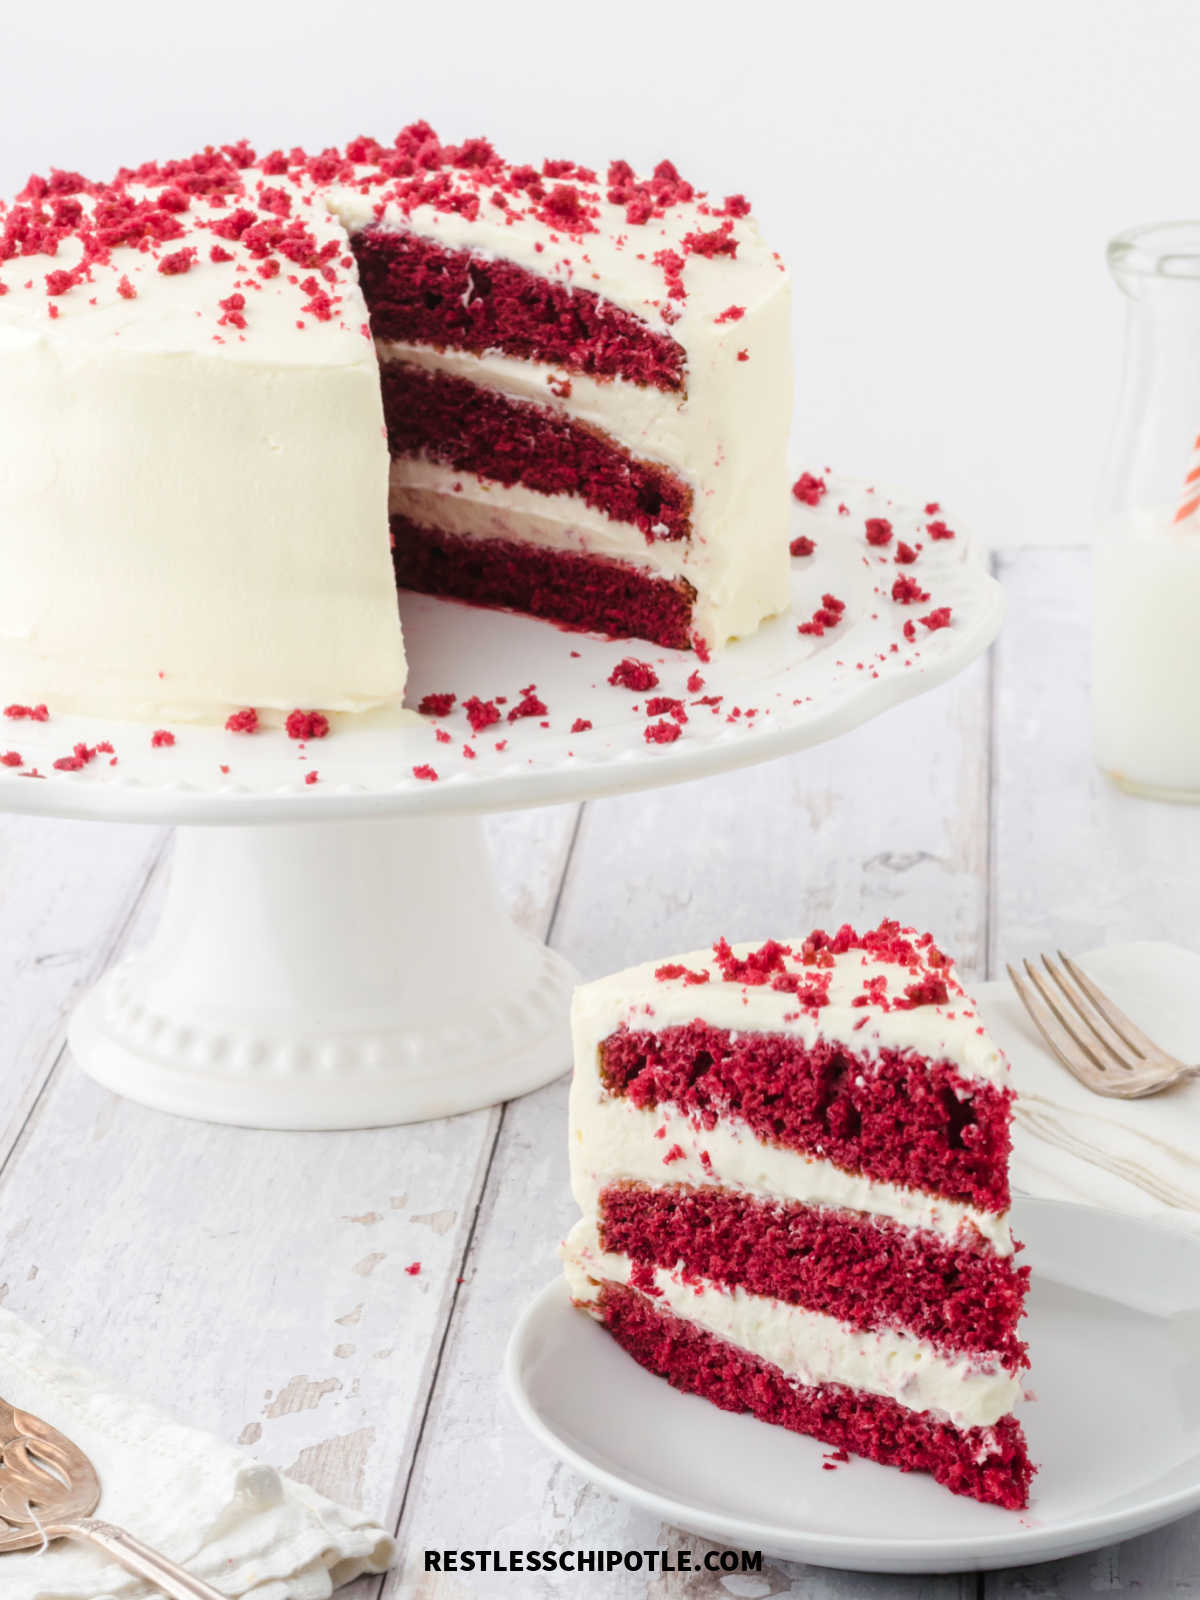 A slice of red velvet cake showing the layers.